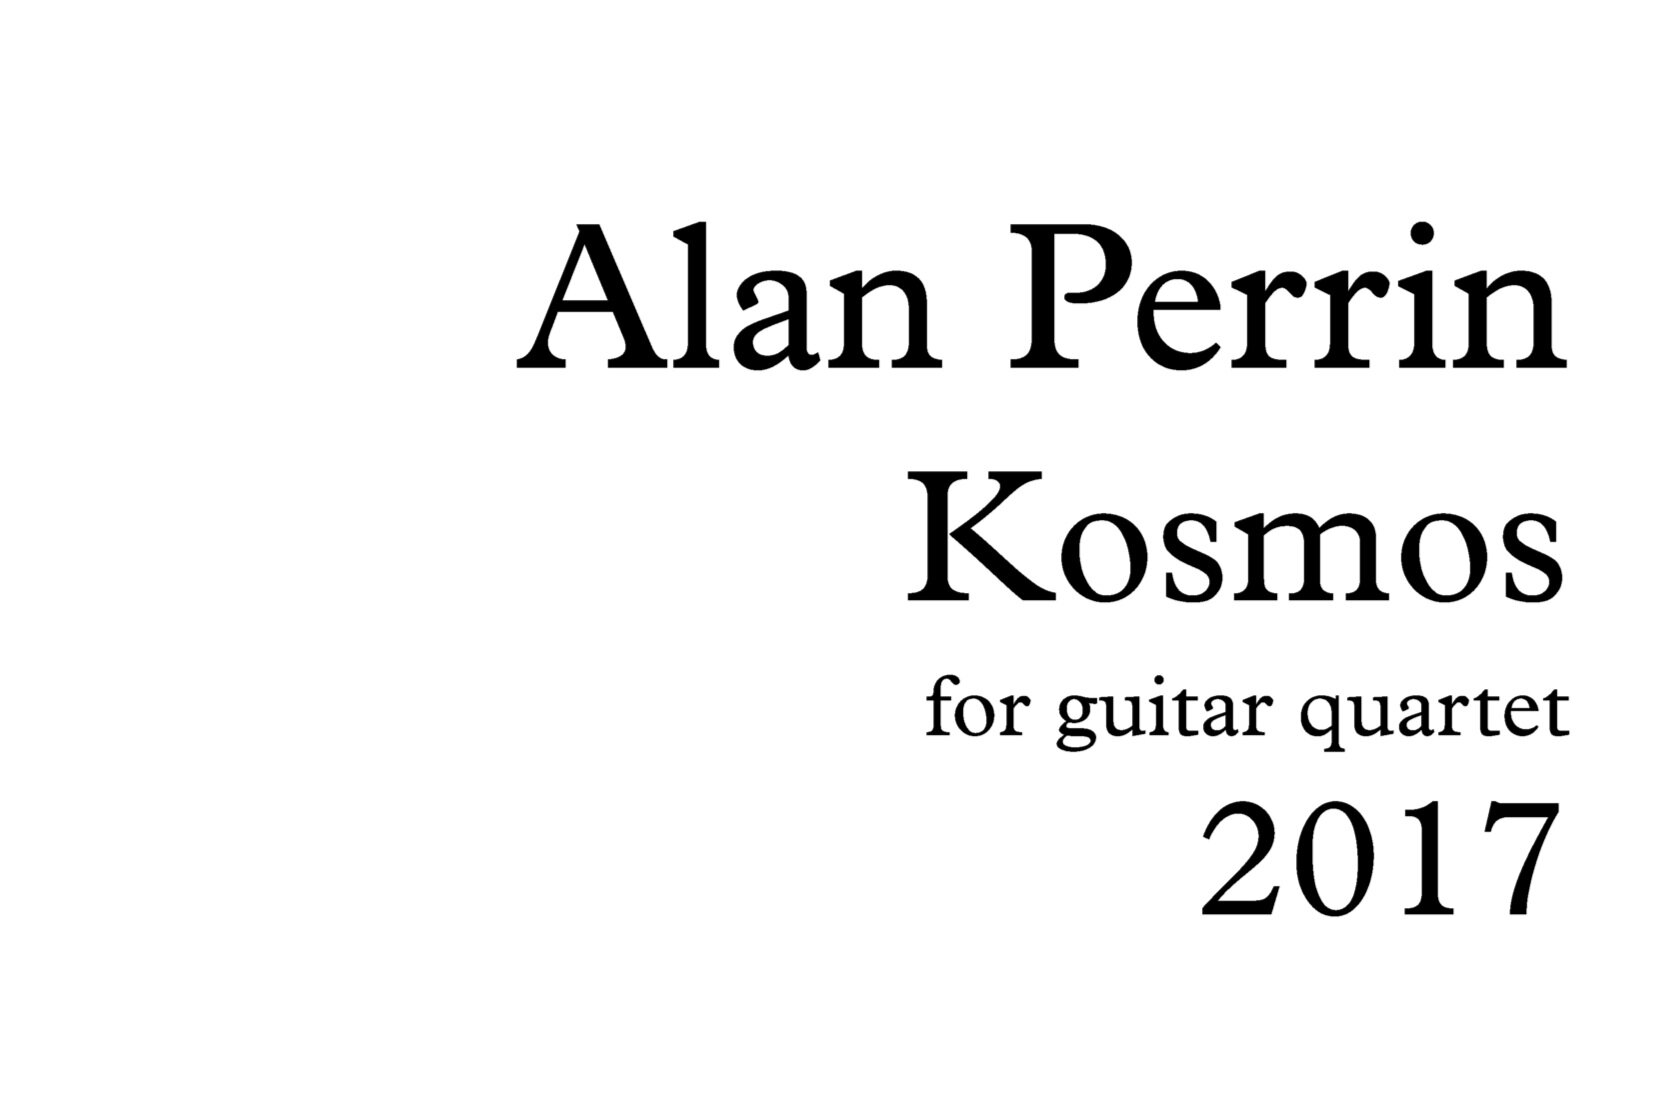 Pages+from+Kosmos+for+guitar+quartet_Alan+Perrin_a4_.pdf.jpg